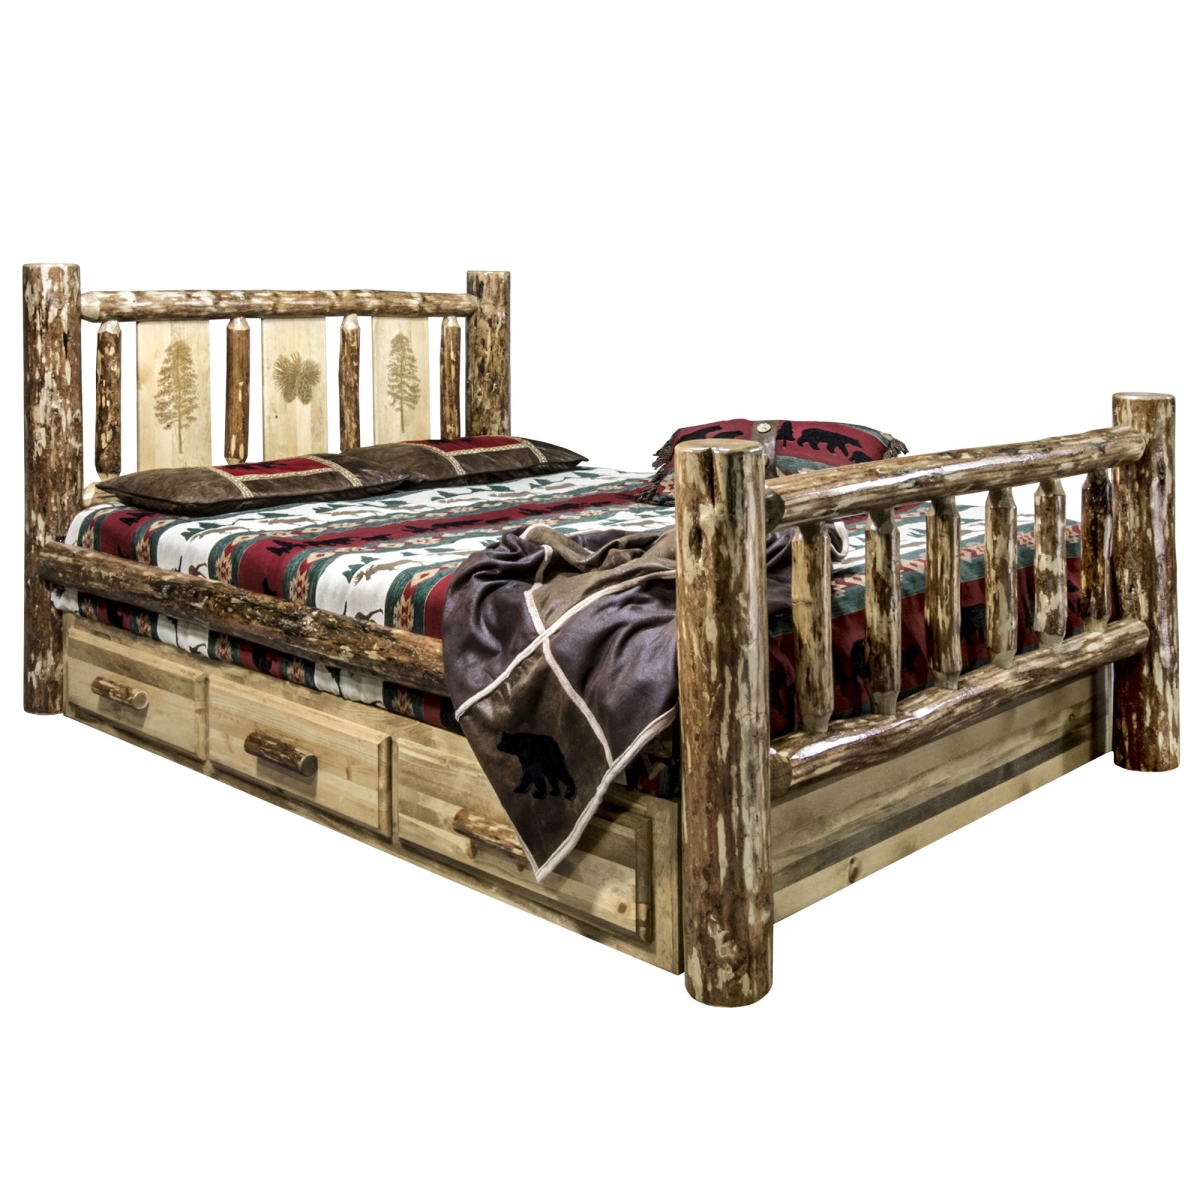 MWGCSBTLZPINE Glacier Country Storage Bed withLaser Engraved Pine Design - Twin Size -  Montana Woodworks